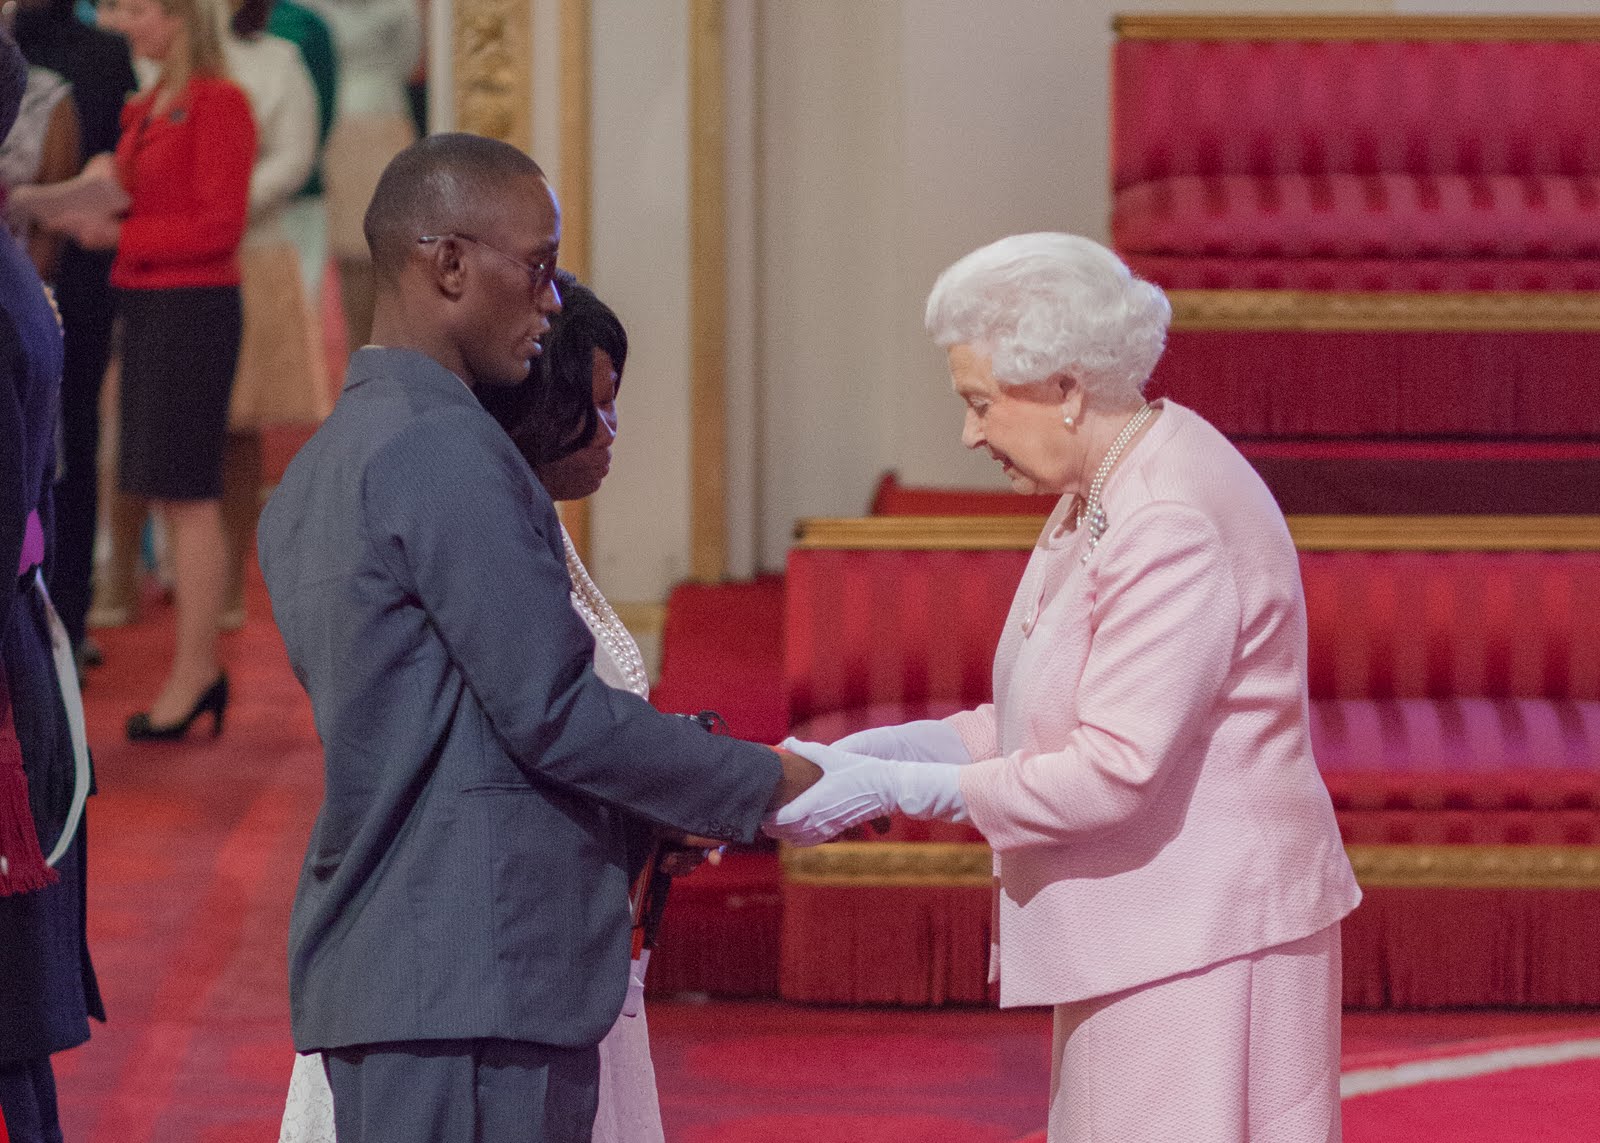 Leroy Phillips 2015 Queen's Young Leader from Guyana